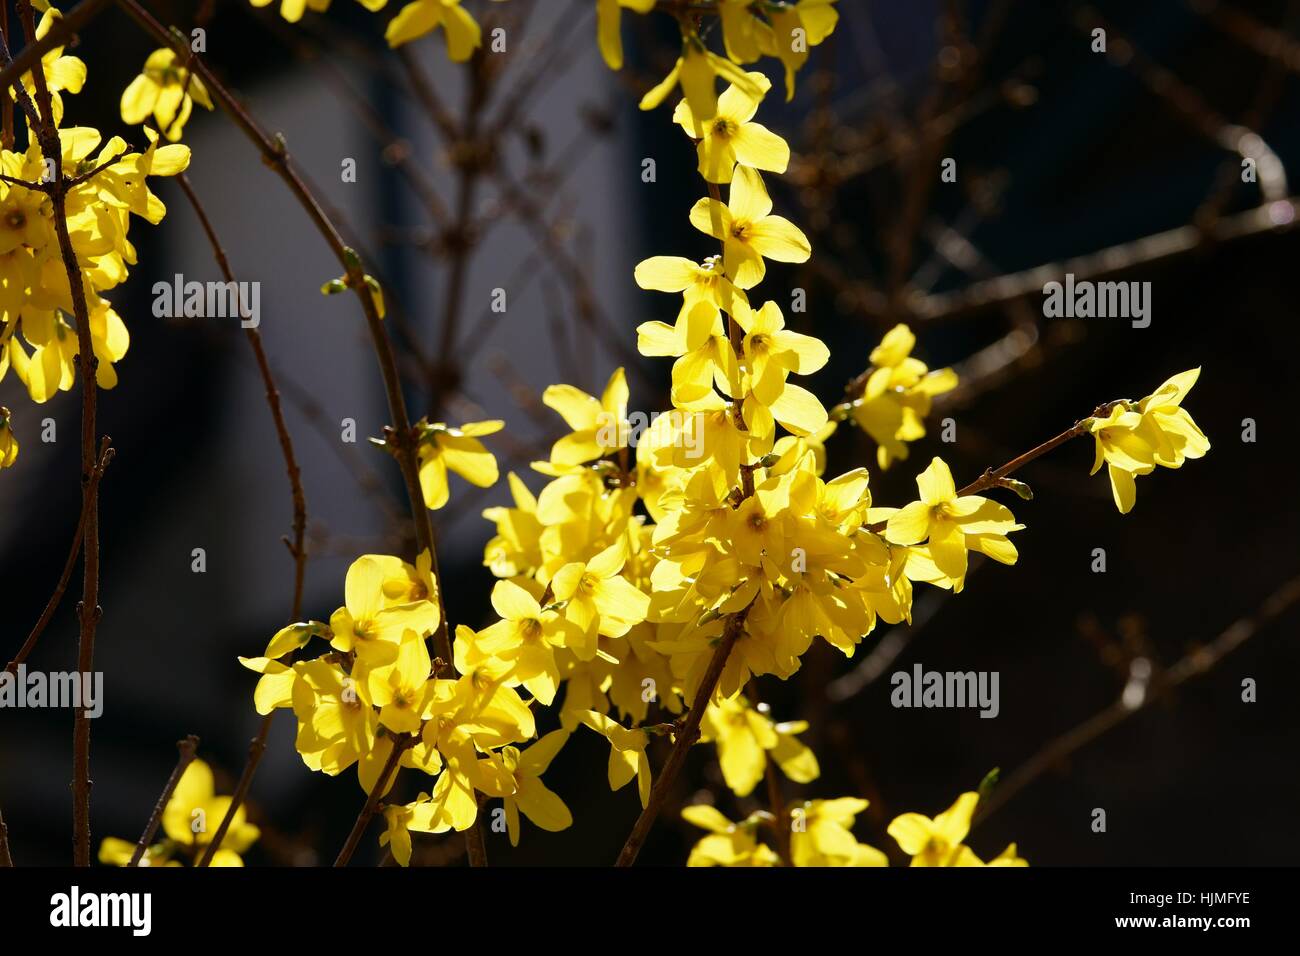 Forsythia branches covered with yellow blossom over dark background Stock Photo